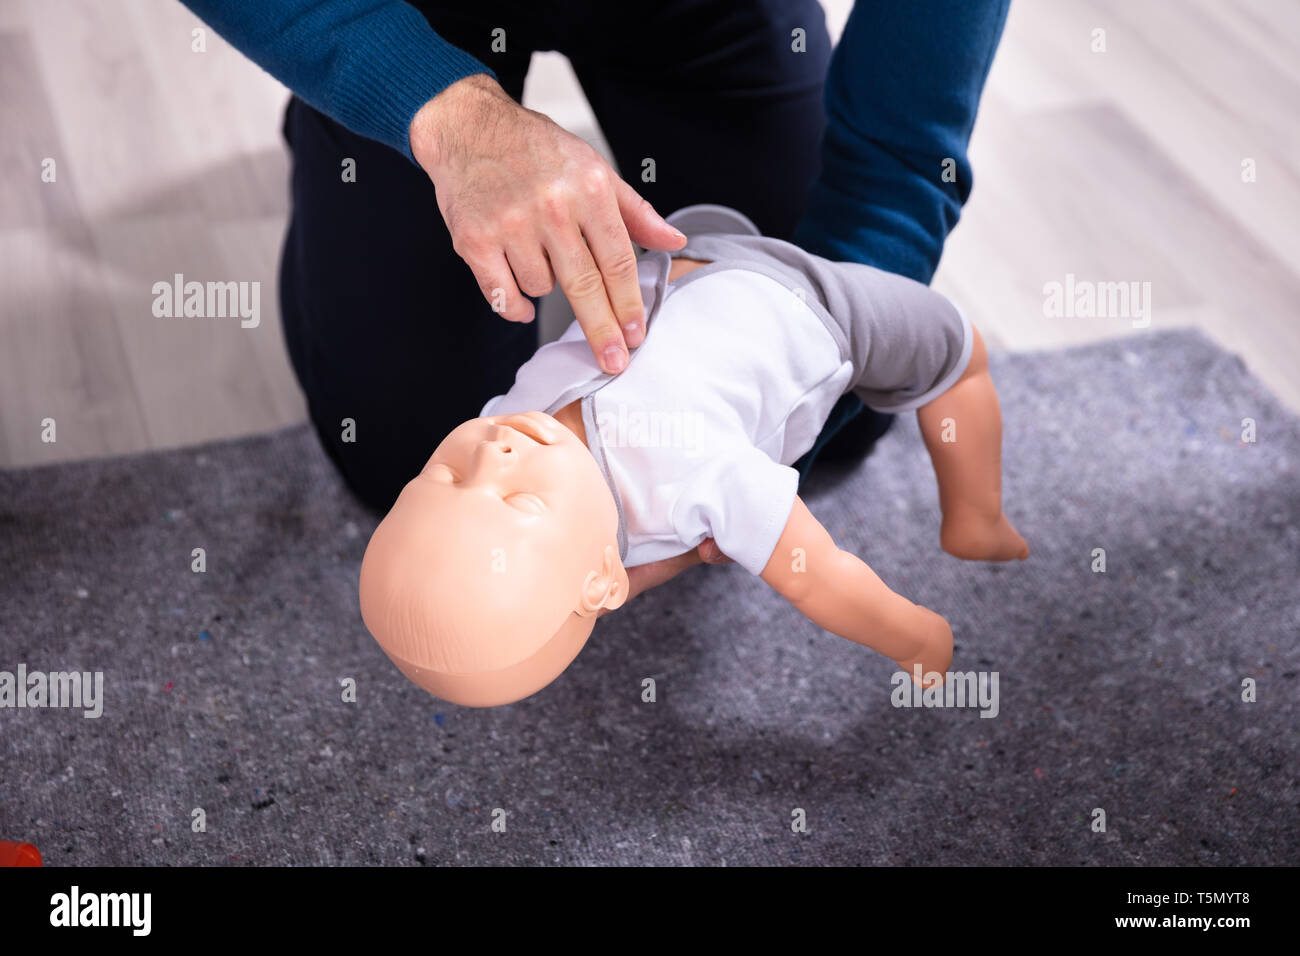 Specialist Giving Baby CPR Dummy First Aid Training To His Colleagues Stock Photo